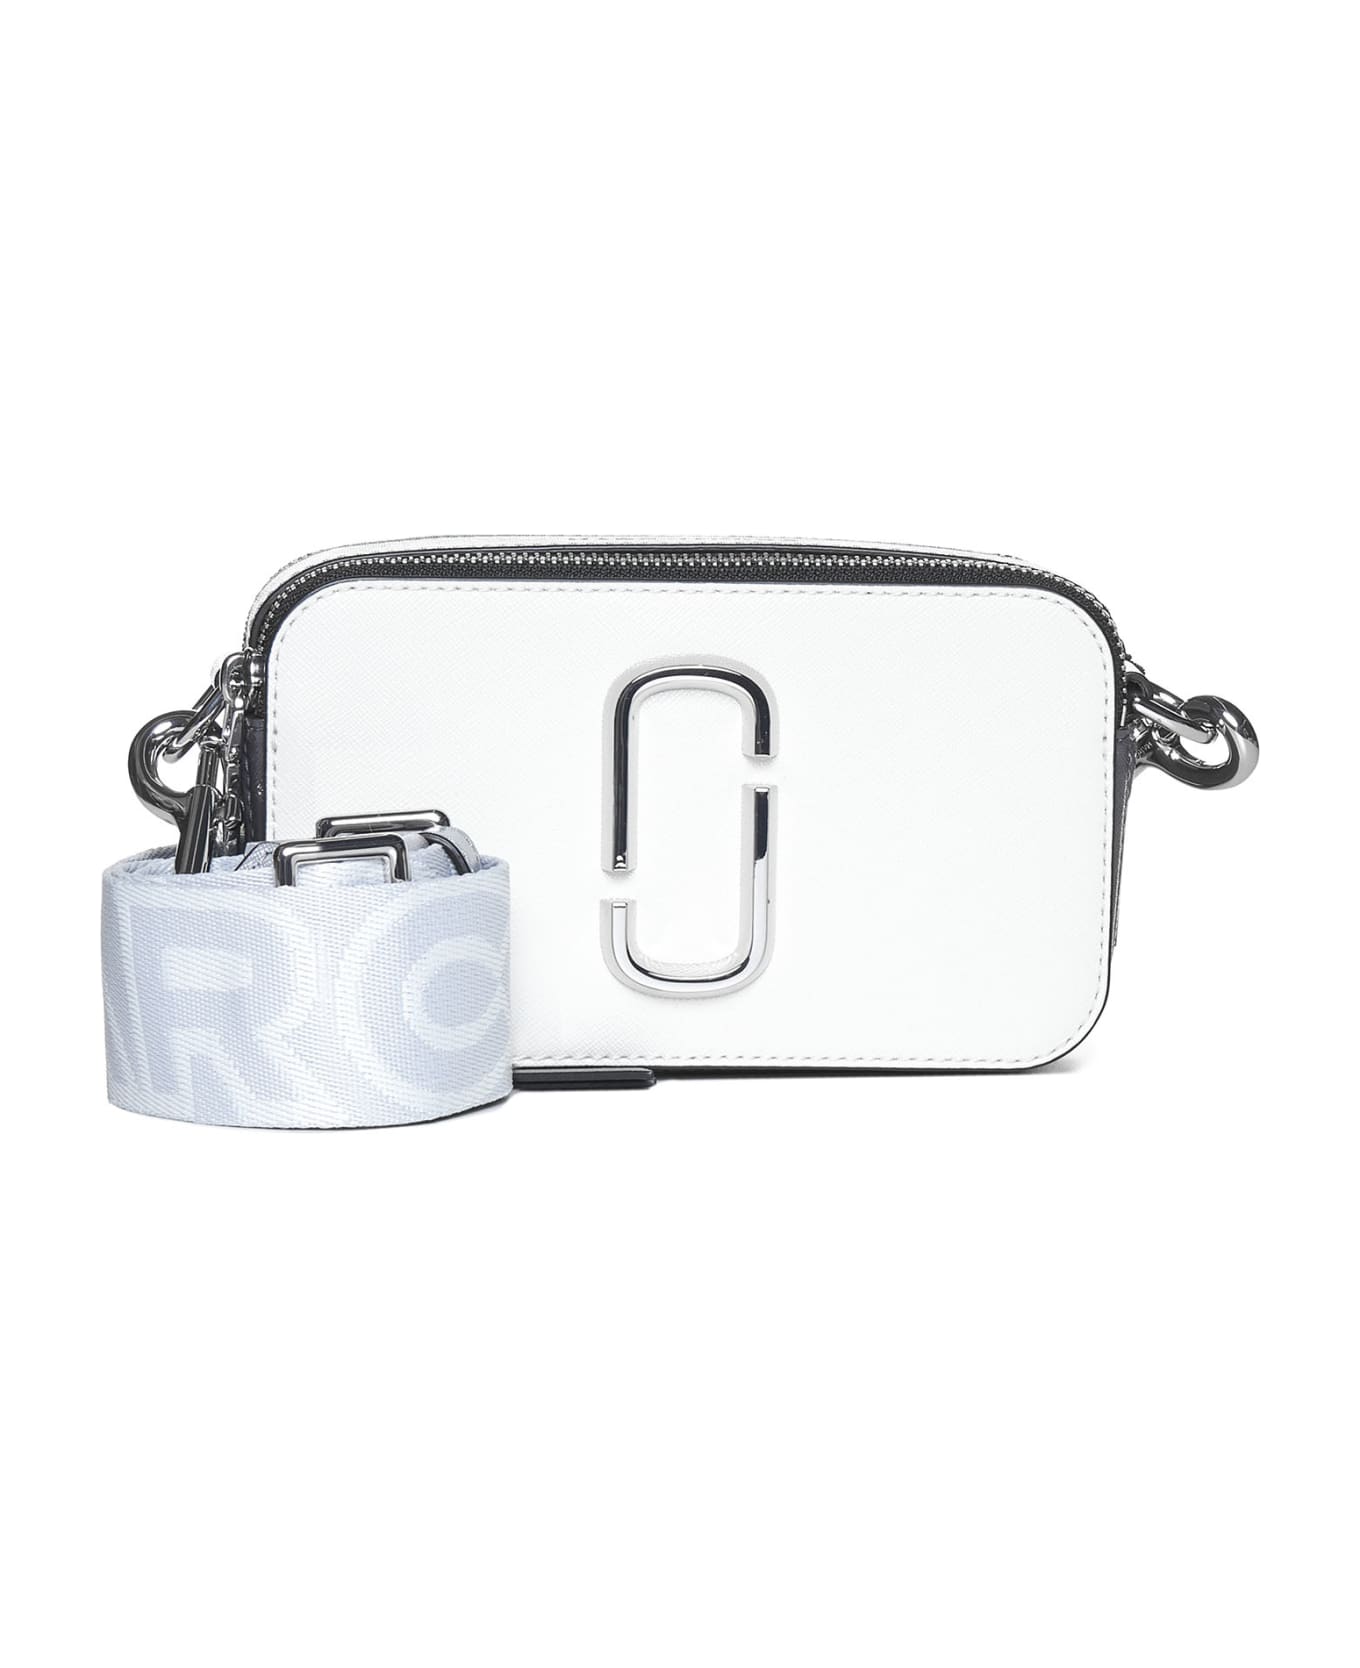 Marc Jacobs Multicolor Leather Snapshot Crossbody Bag - White クラッチバッグ